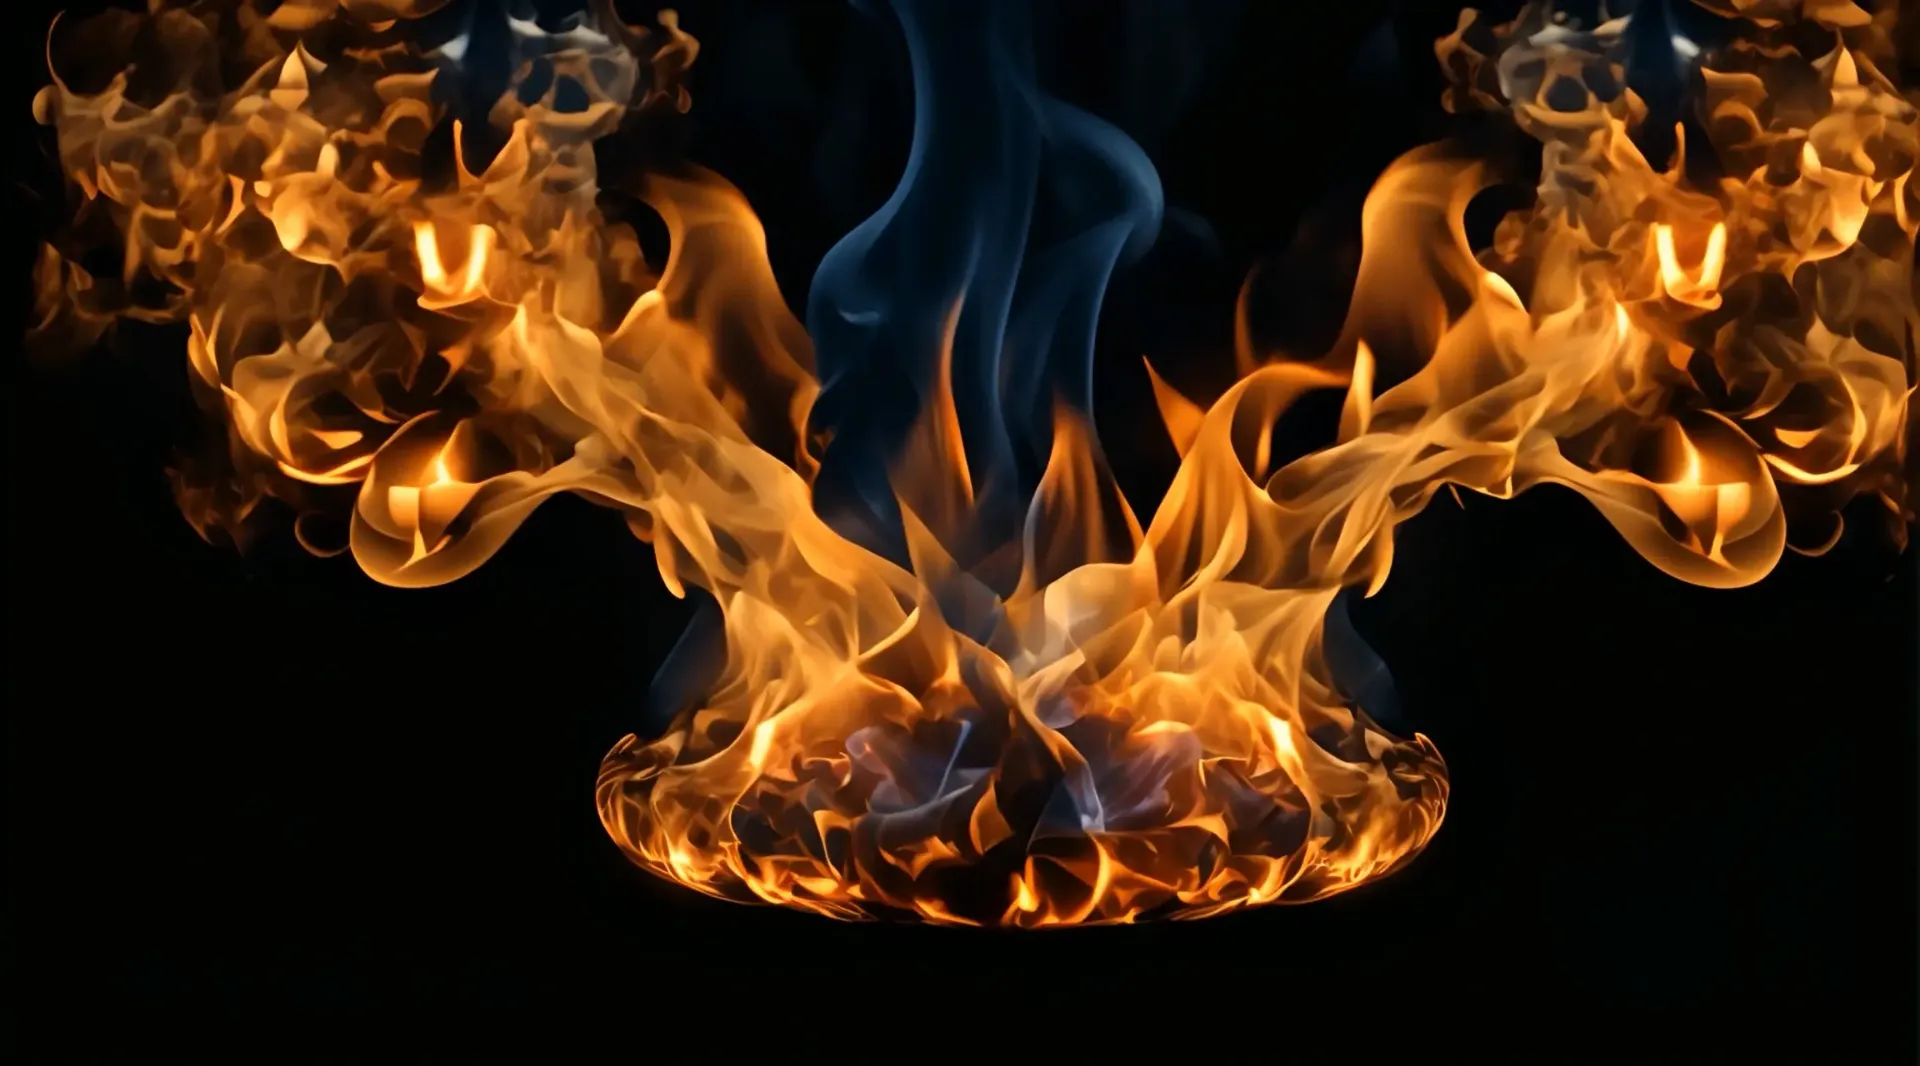 Mesmerizing Fire Play Artistic Smoke and Flame Video